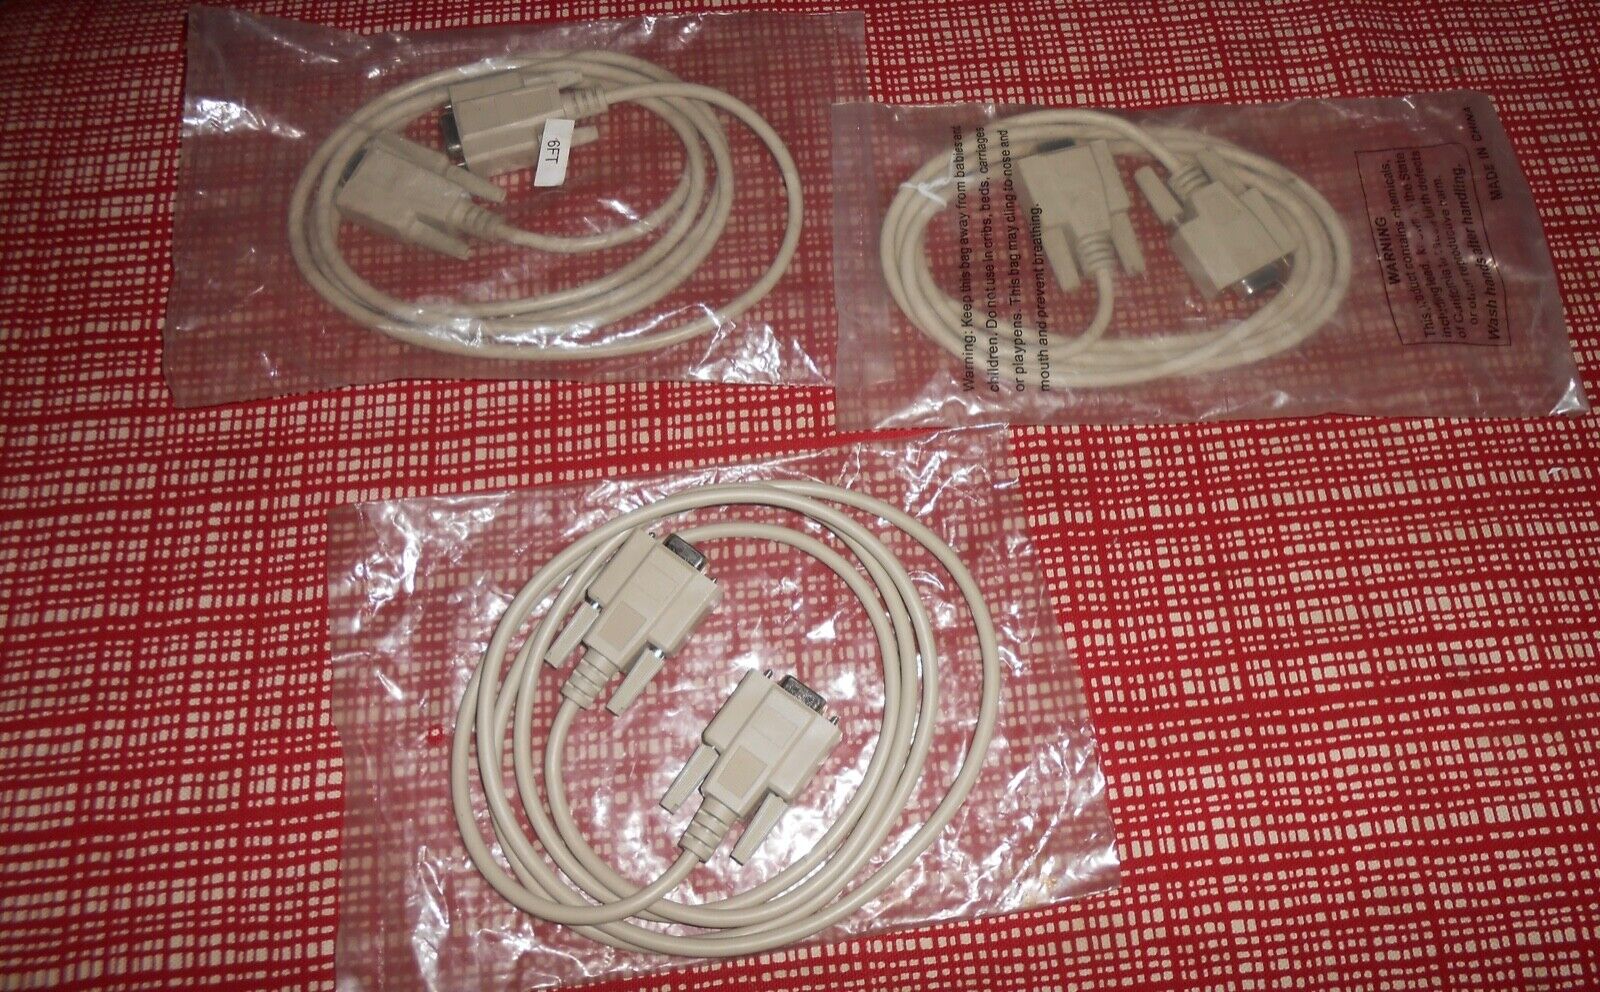 3X LOT 6 FEET Null Modem DB9 to DB9 Extension Cable RS-232 Female to Female Cord